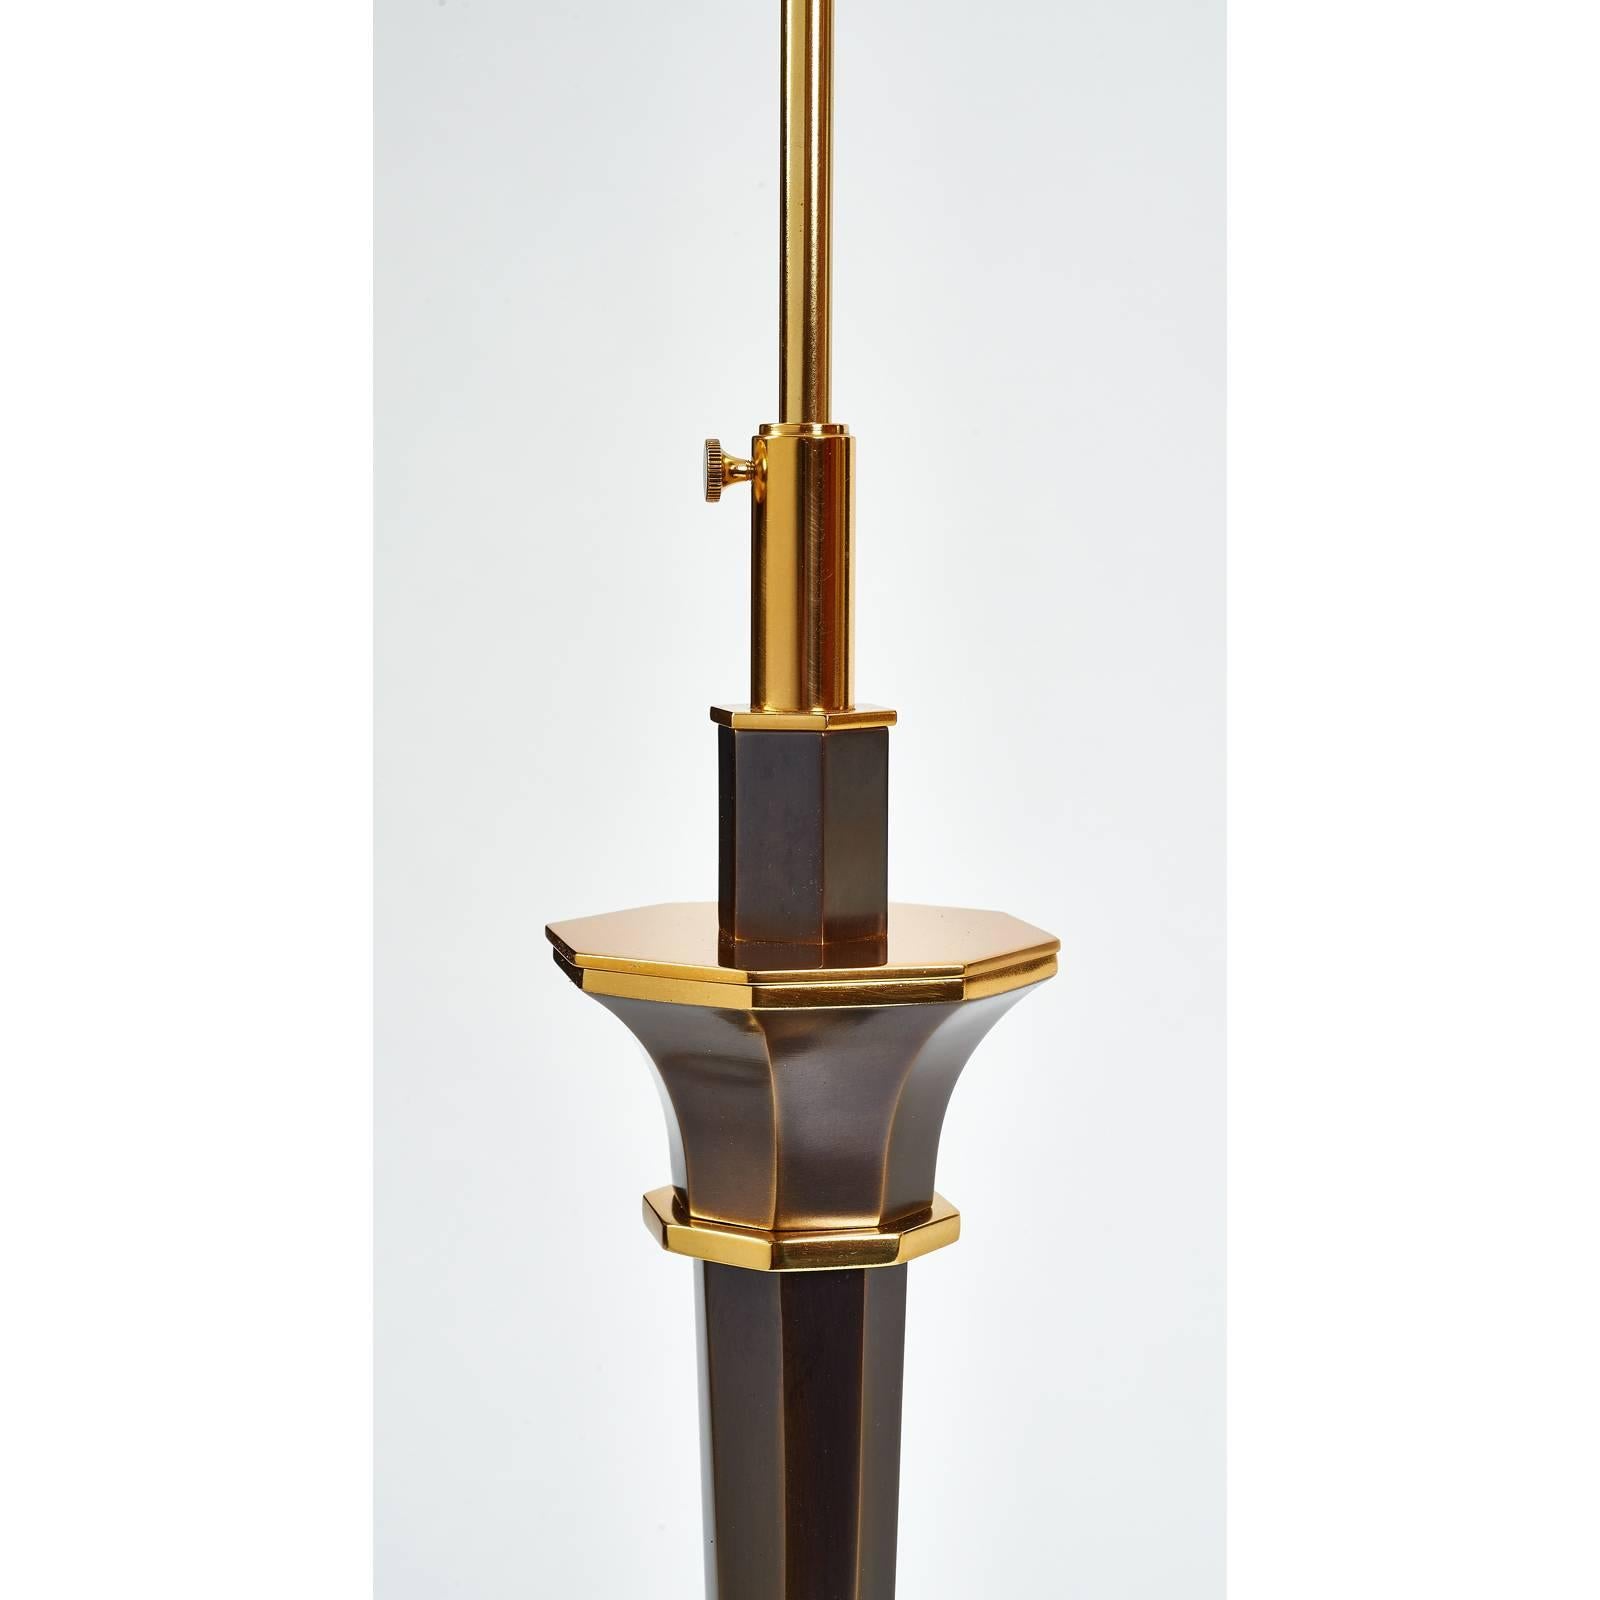 French Genet Michon Bronze Table Lamp with Tapered Octagonal Shaft, France, 1950s